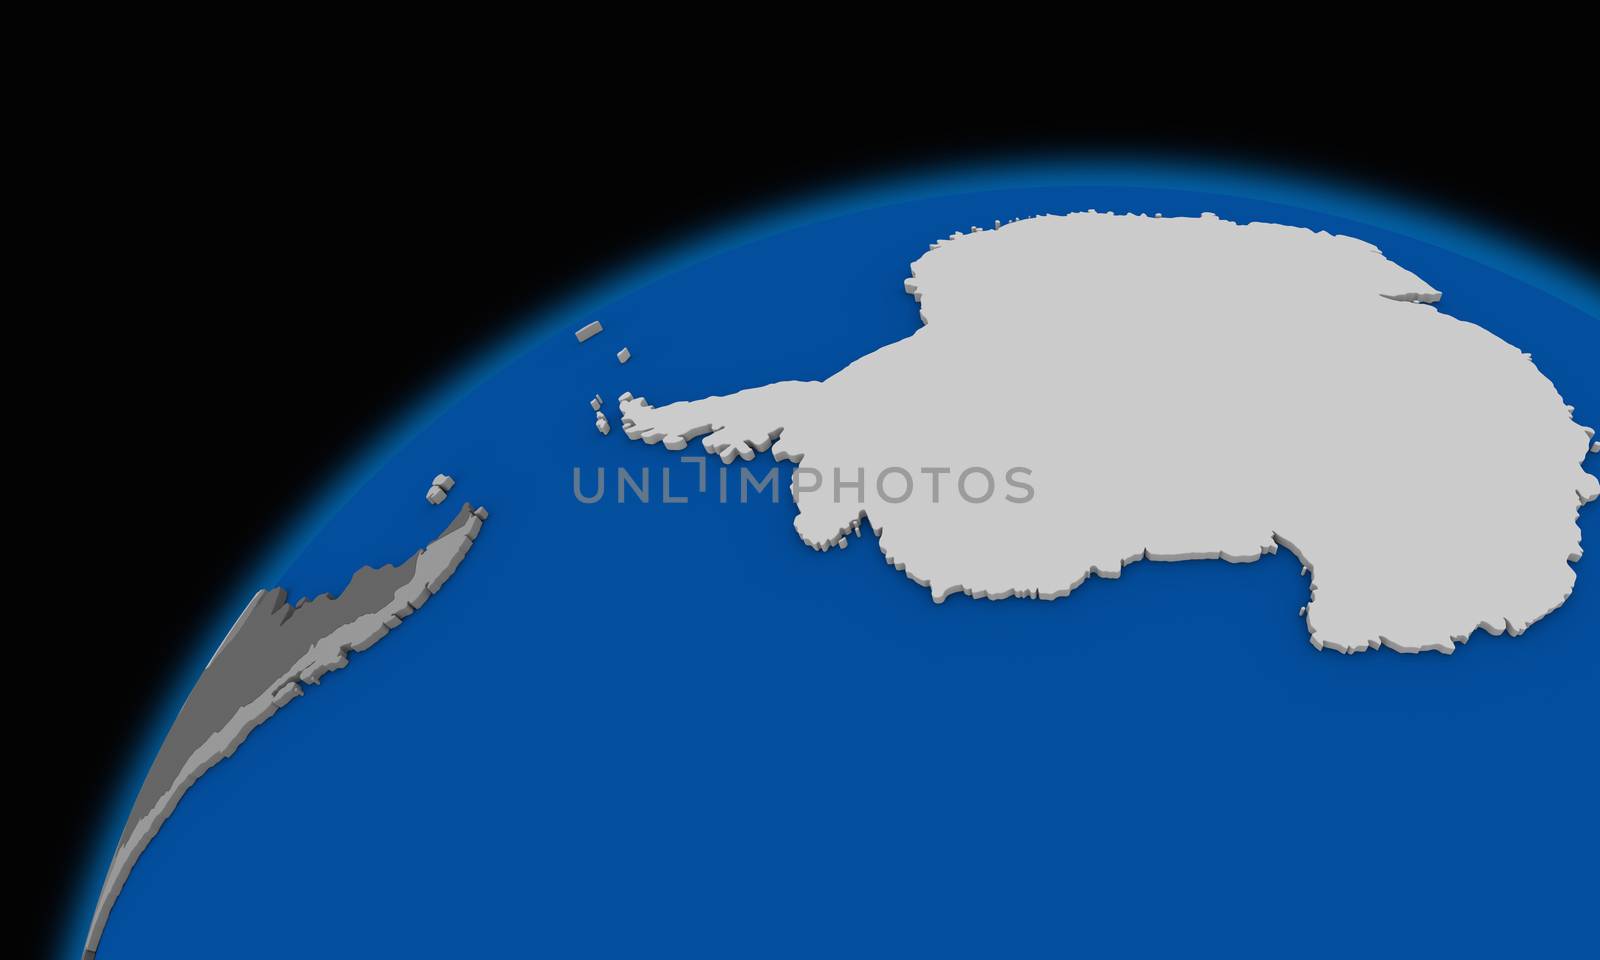 Antarctica on planet Earth political map by Harvepino